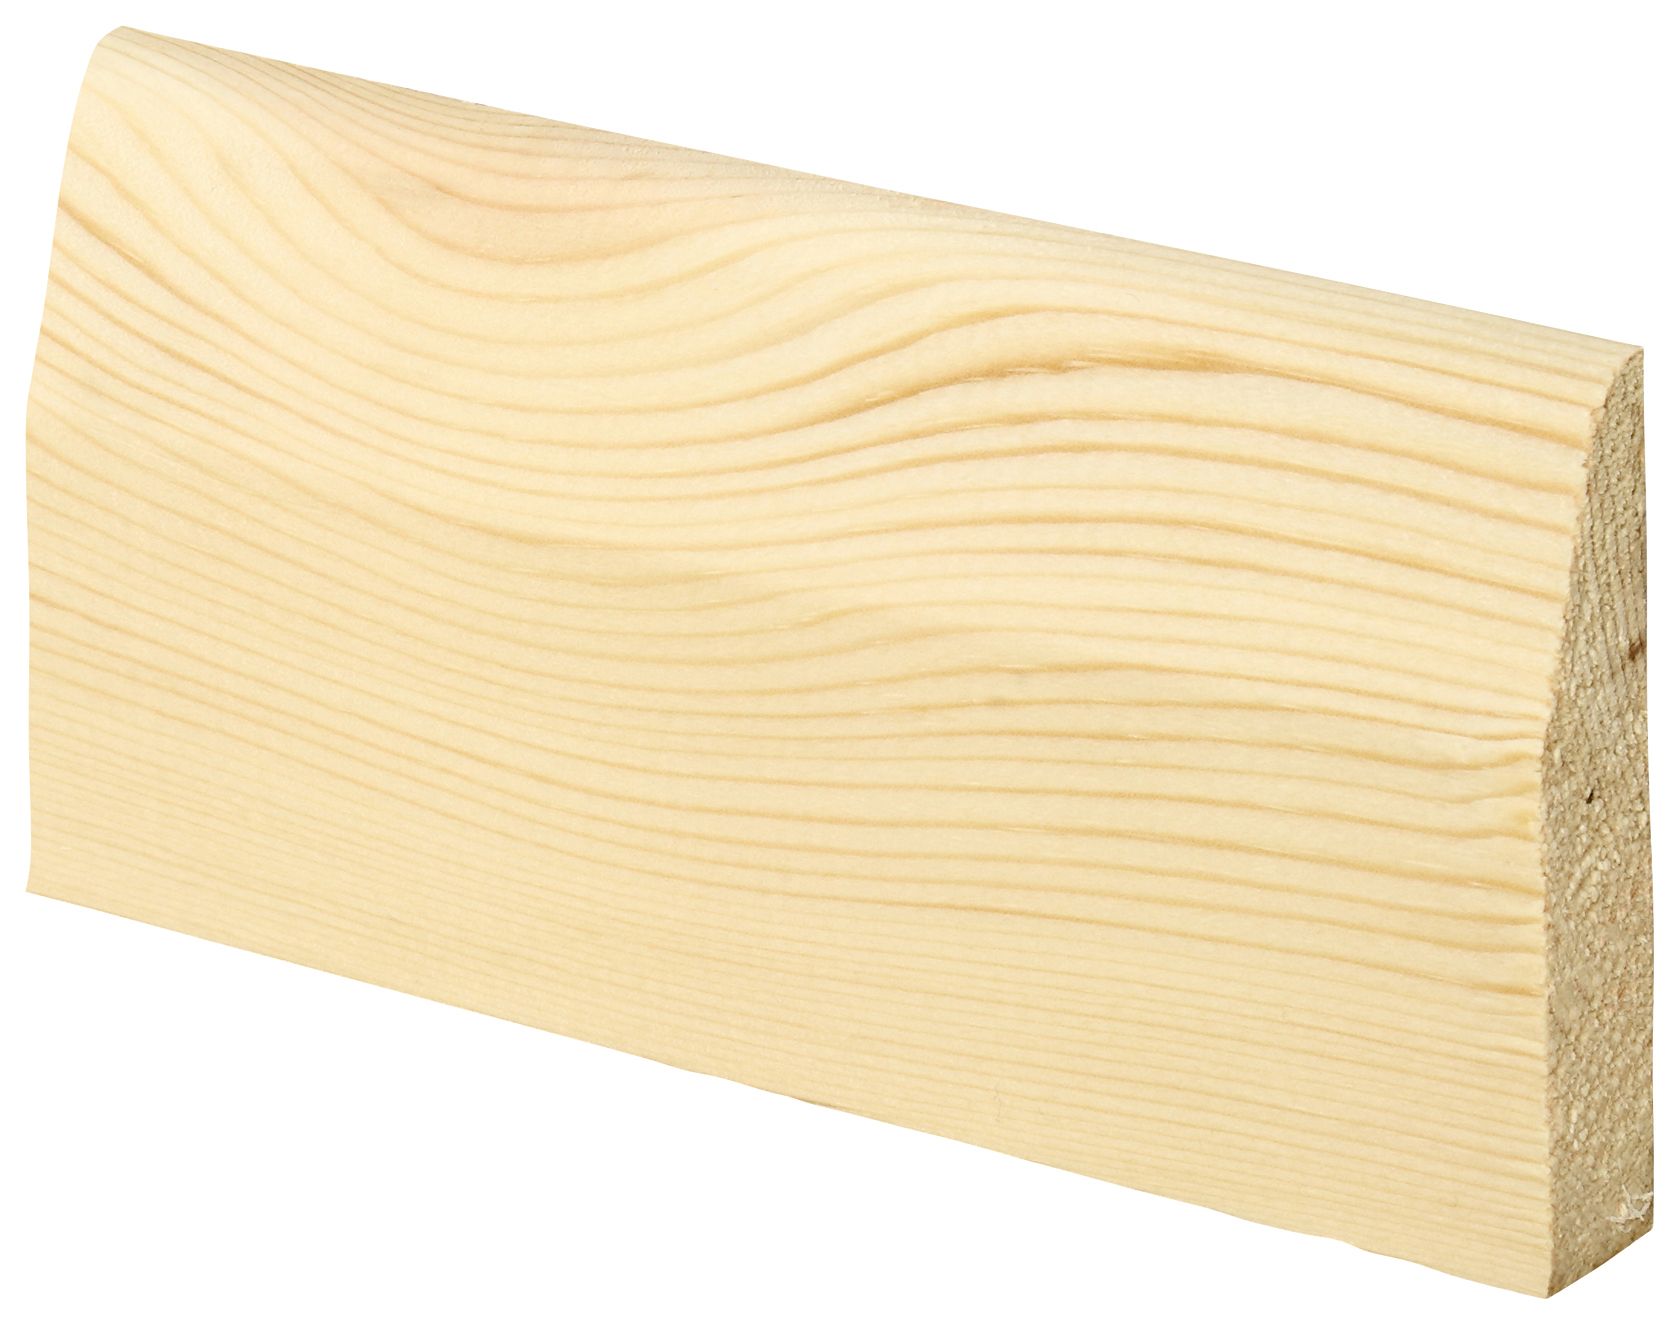 Wickes Chamfered Pine Architrave 19 x 69 x 2100mm